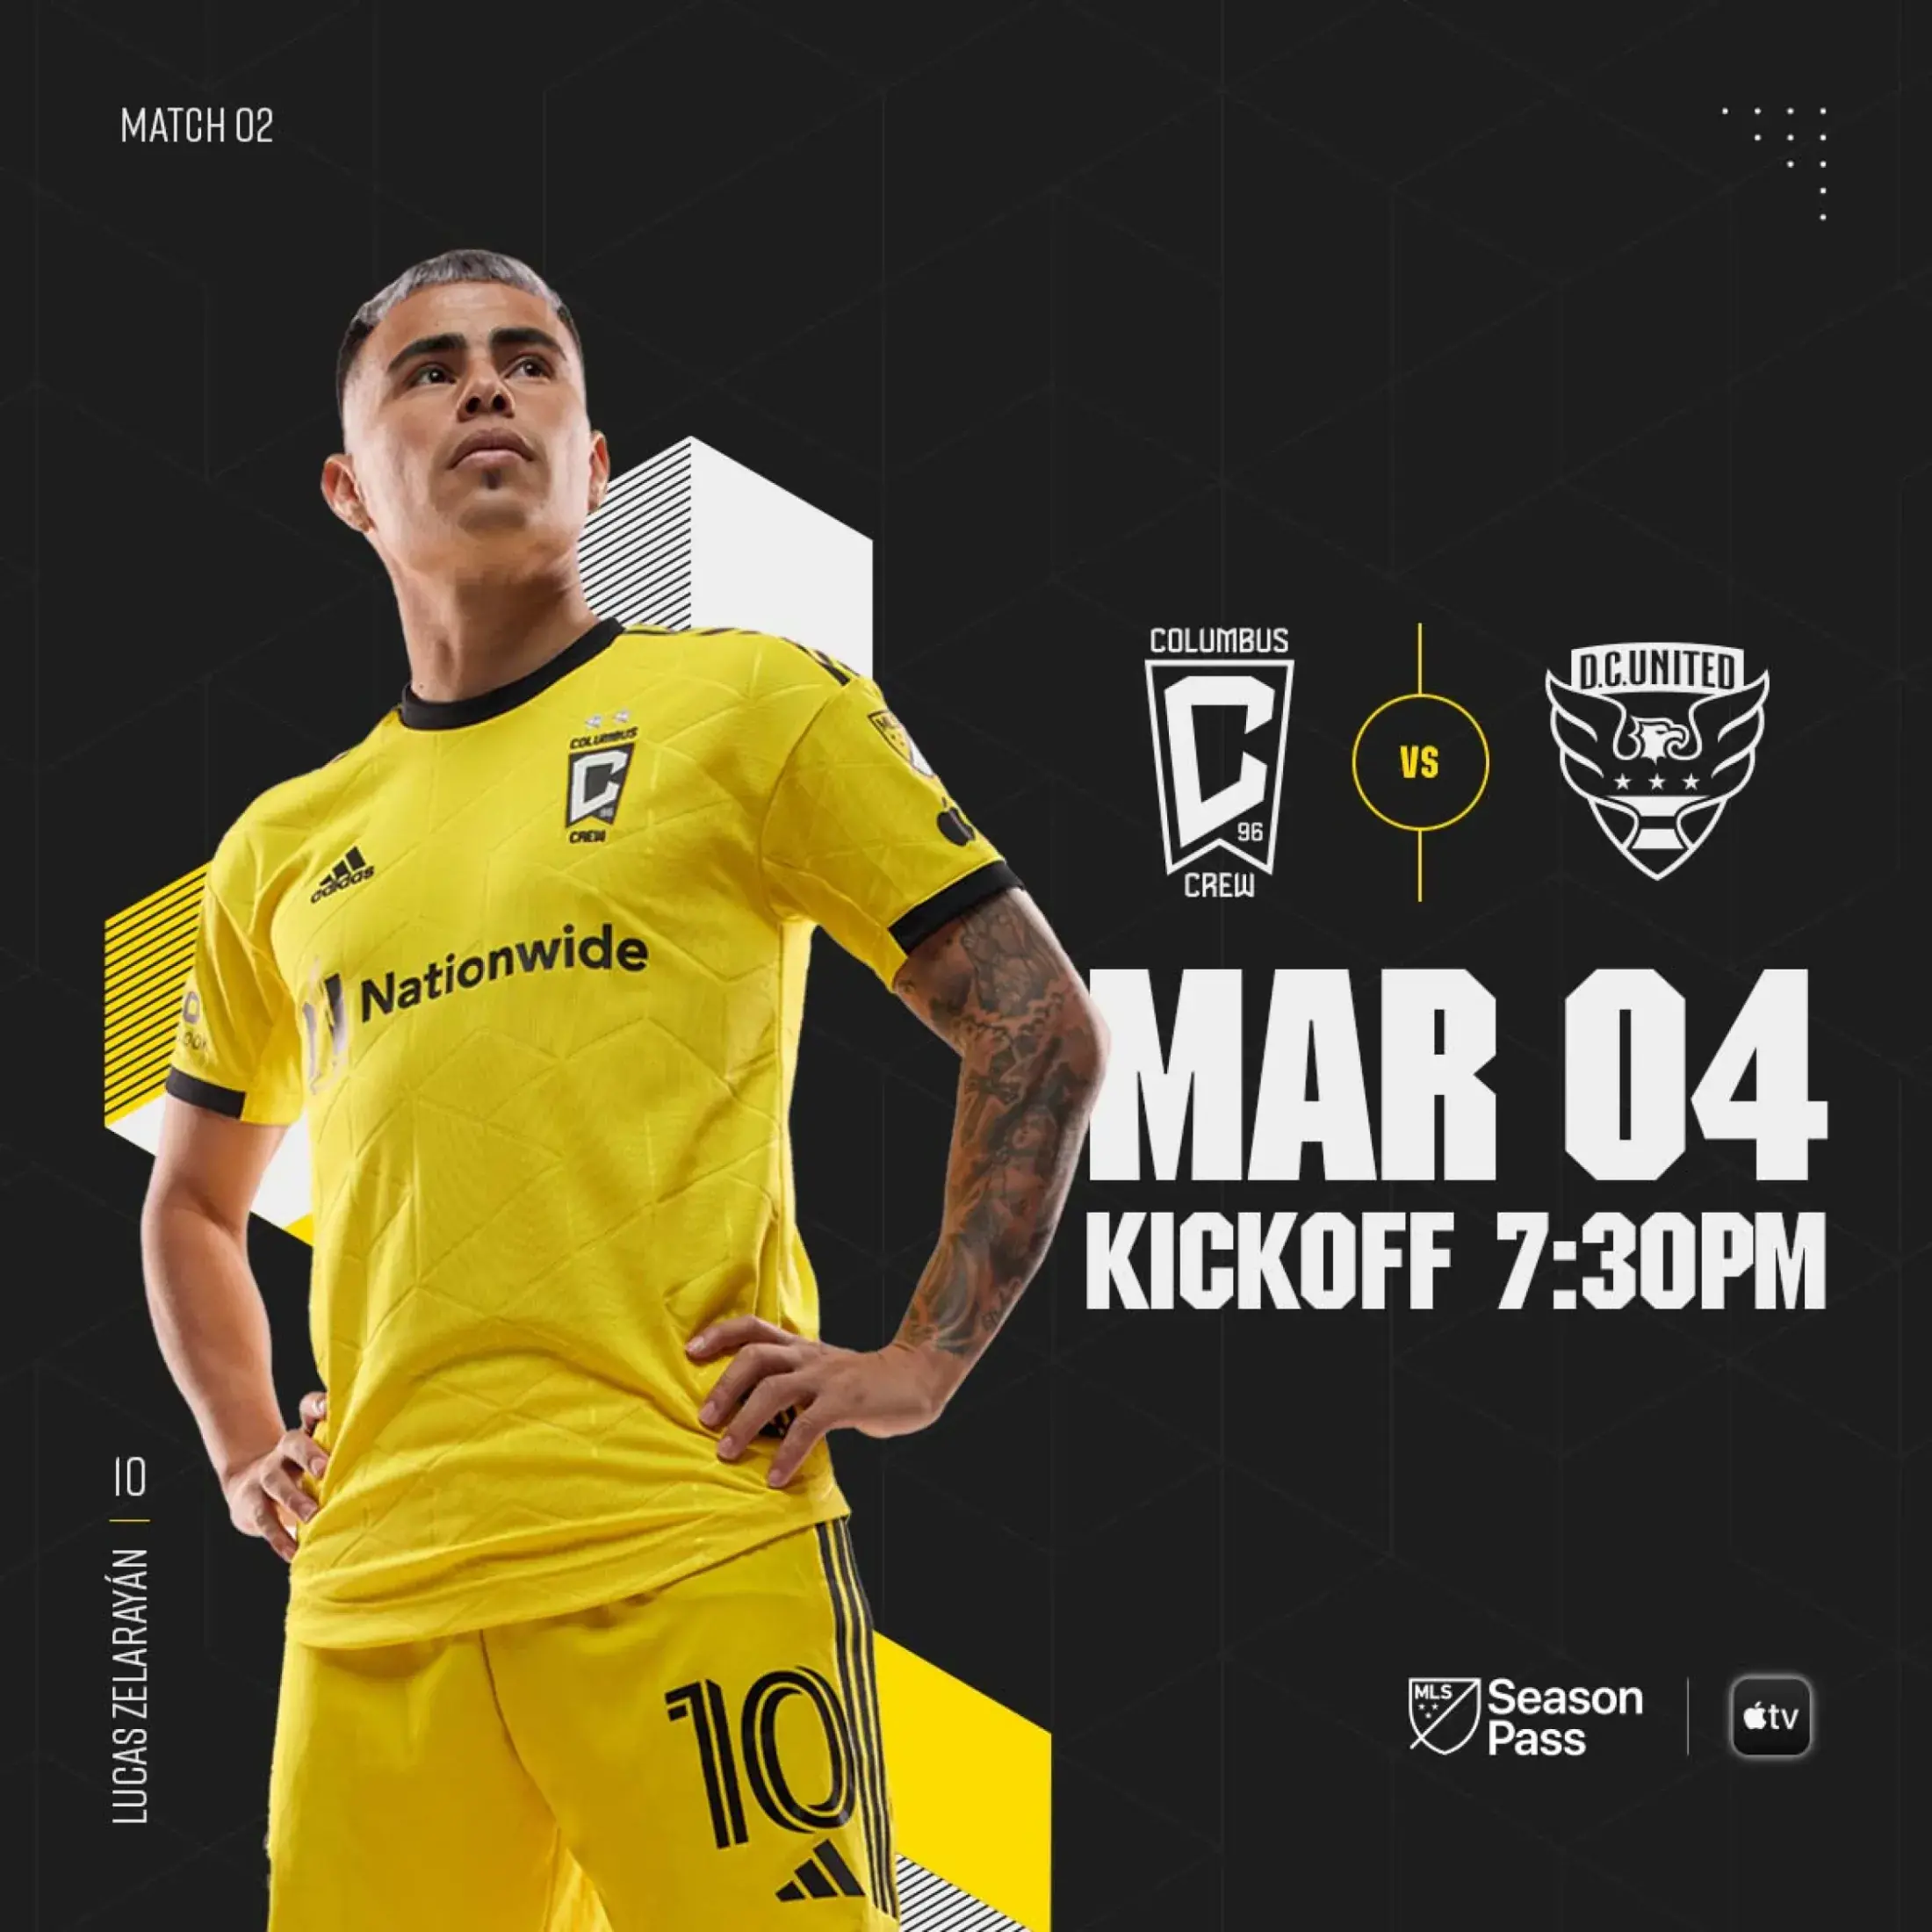 Kickoff graphic featuring Crew player with hands on hips looking up to the left